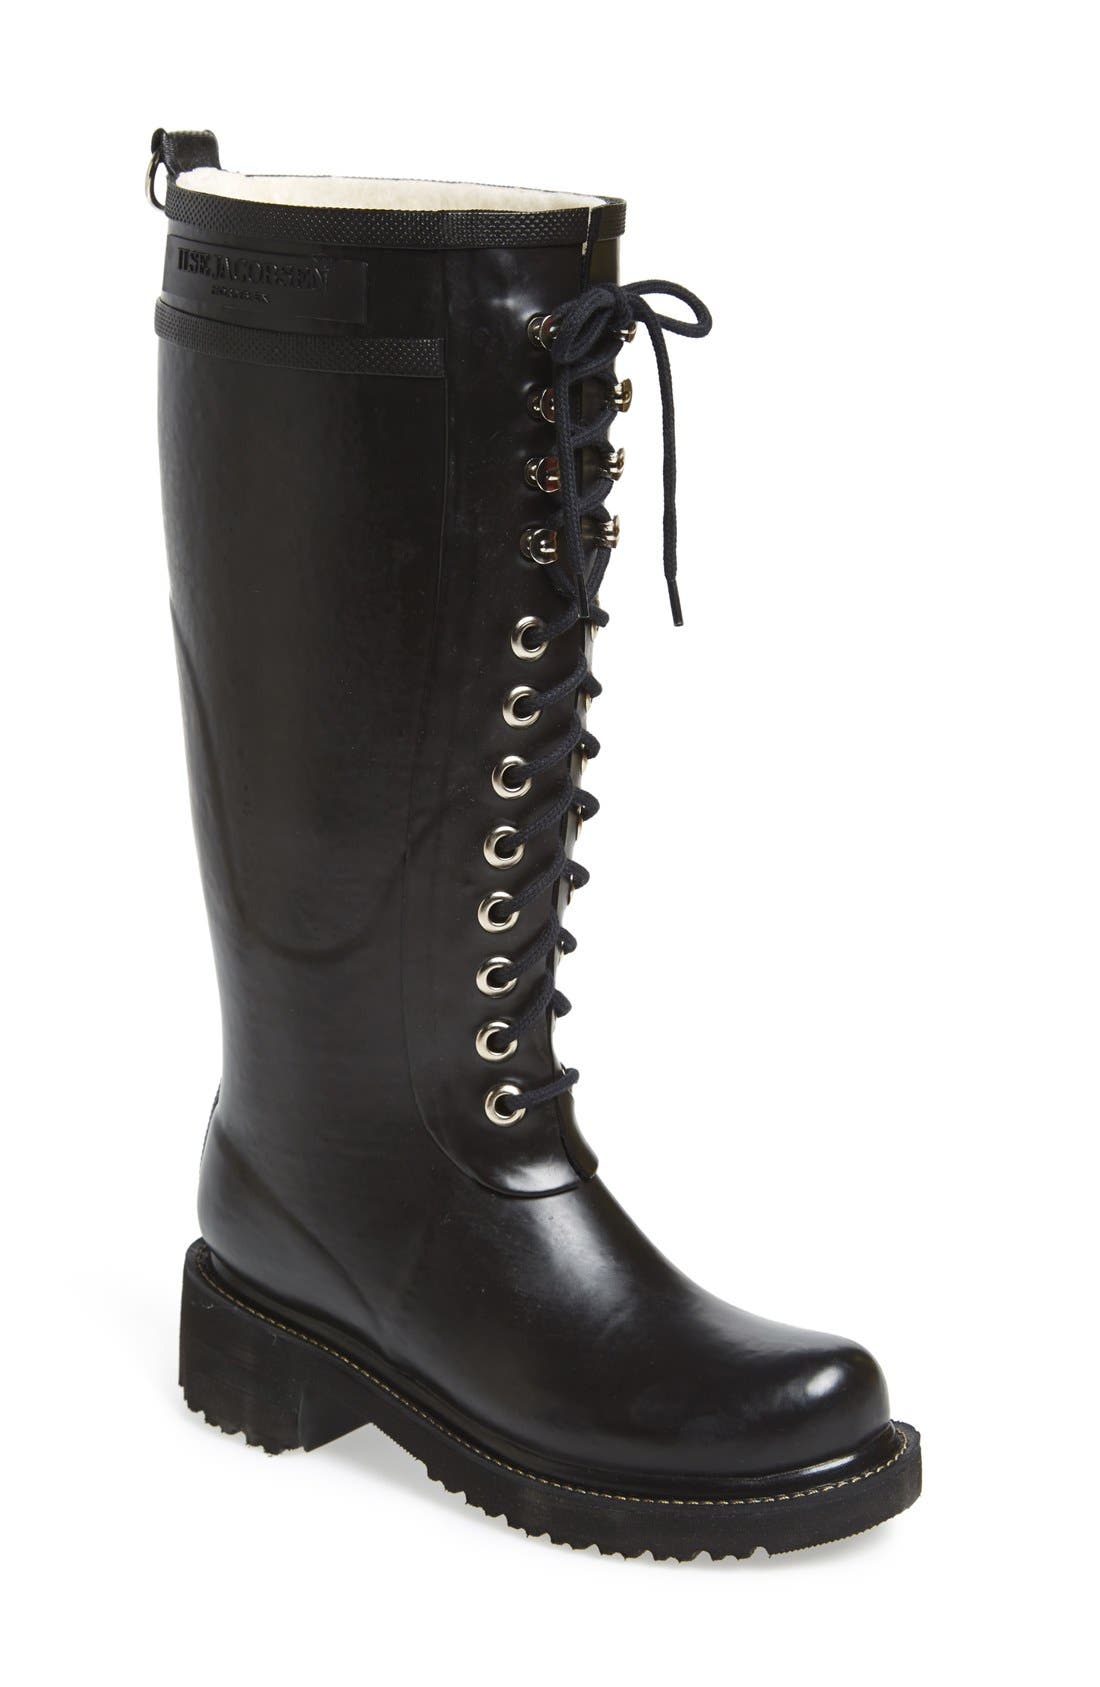 lace up rain boots womens